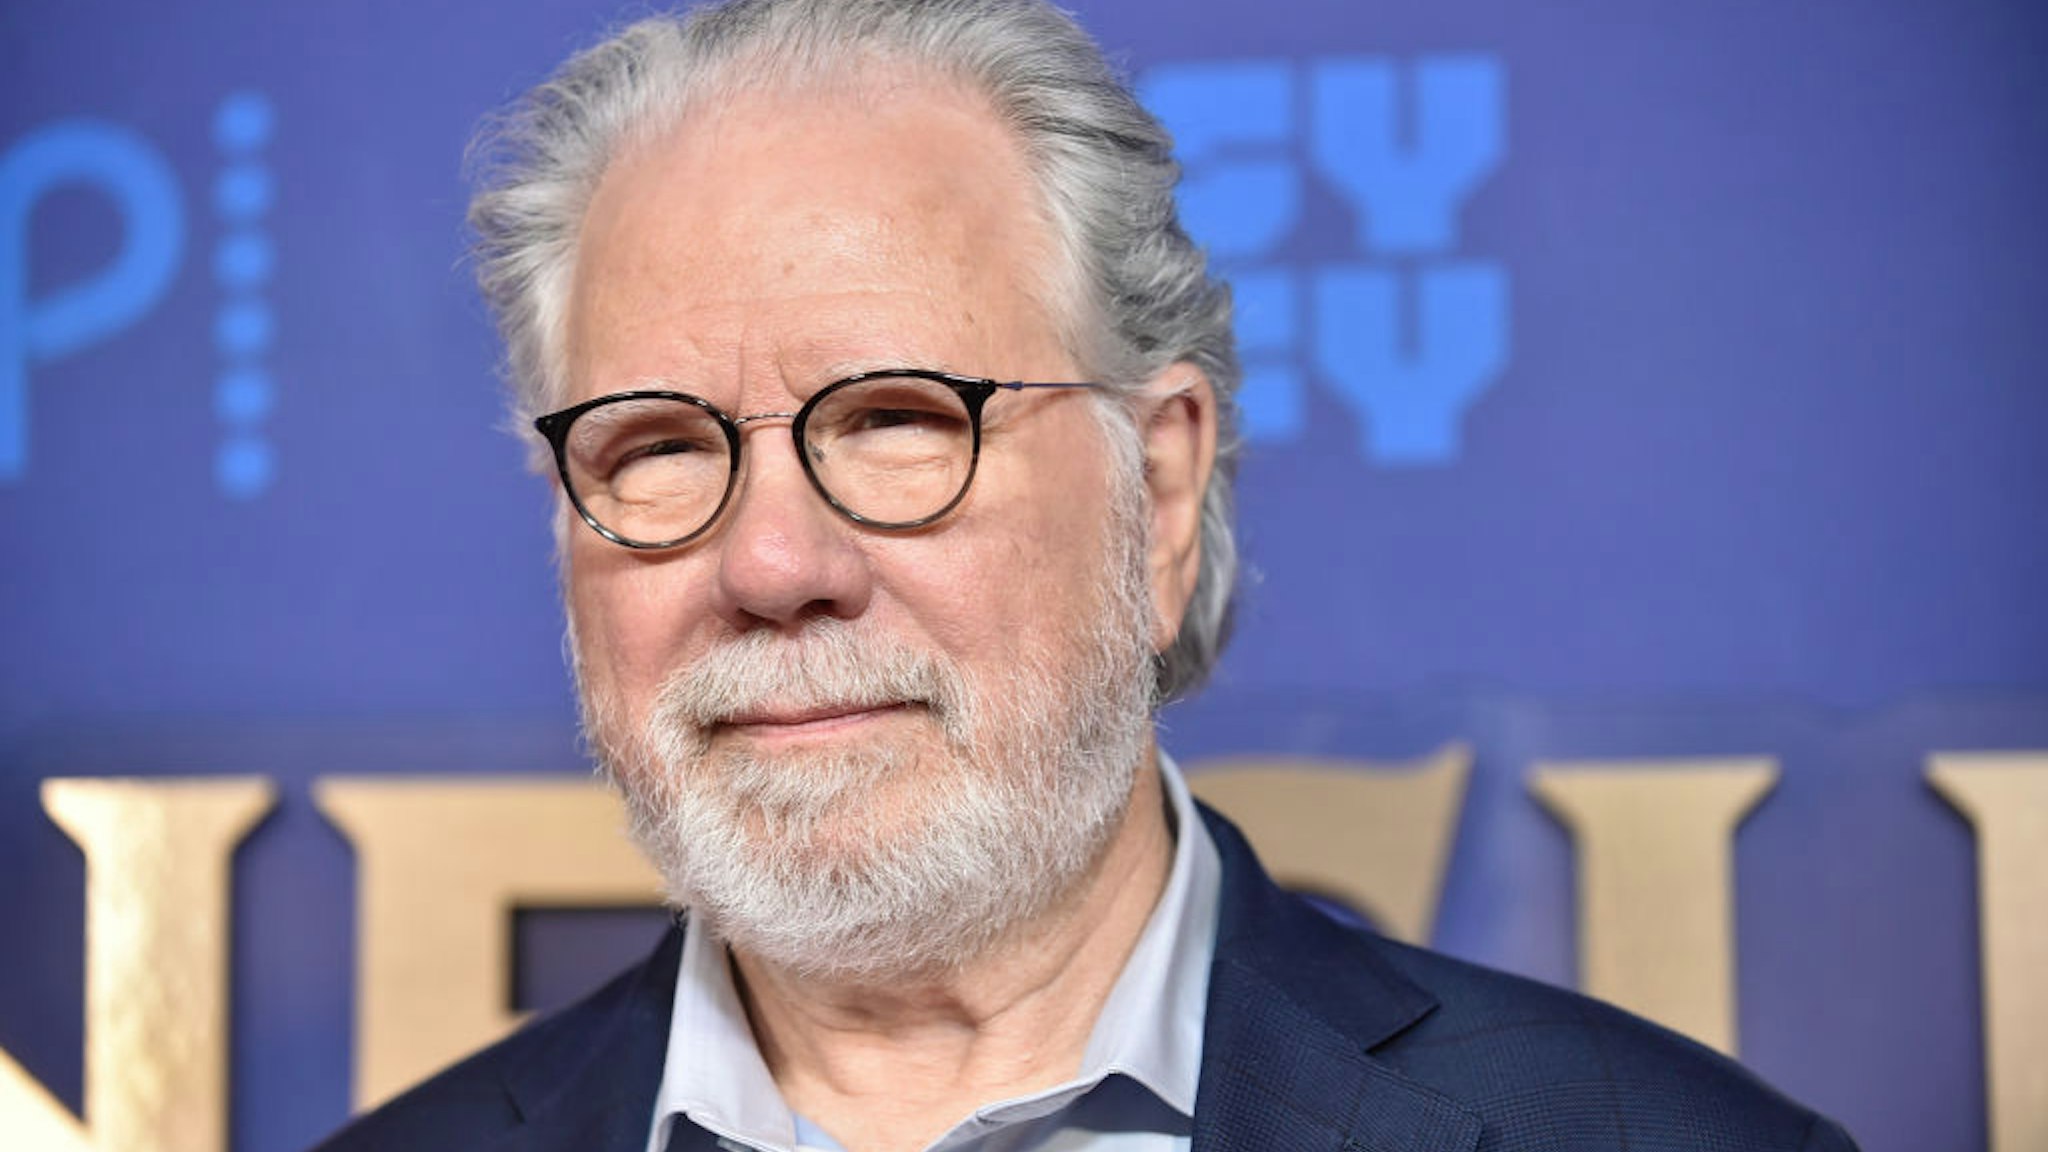 PASADENA, CALIFORNIA - JANUARY 15: John Larroquette attends the 2023 NBCUniversal TCA Winter Press Tour at The Langham Huntington, Pasadena on January 15, 2023 in Pasadena, California. (Photo by Rodin Eckenroth/Getty Images)